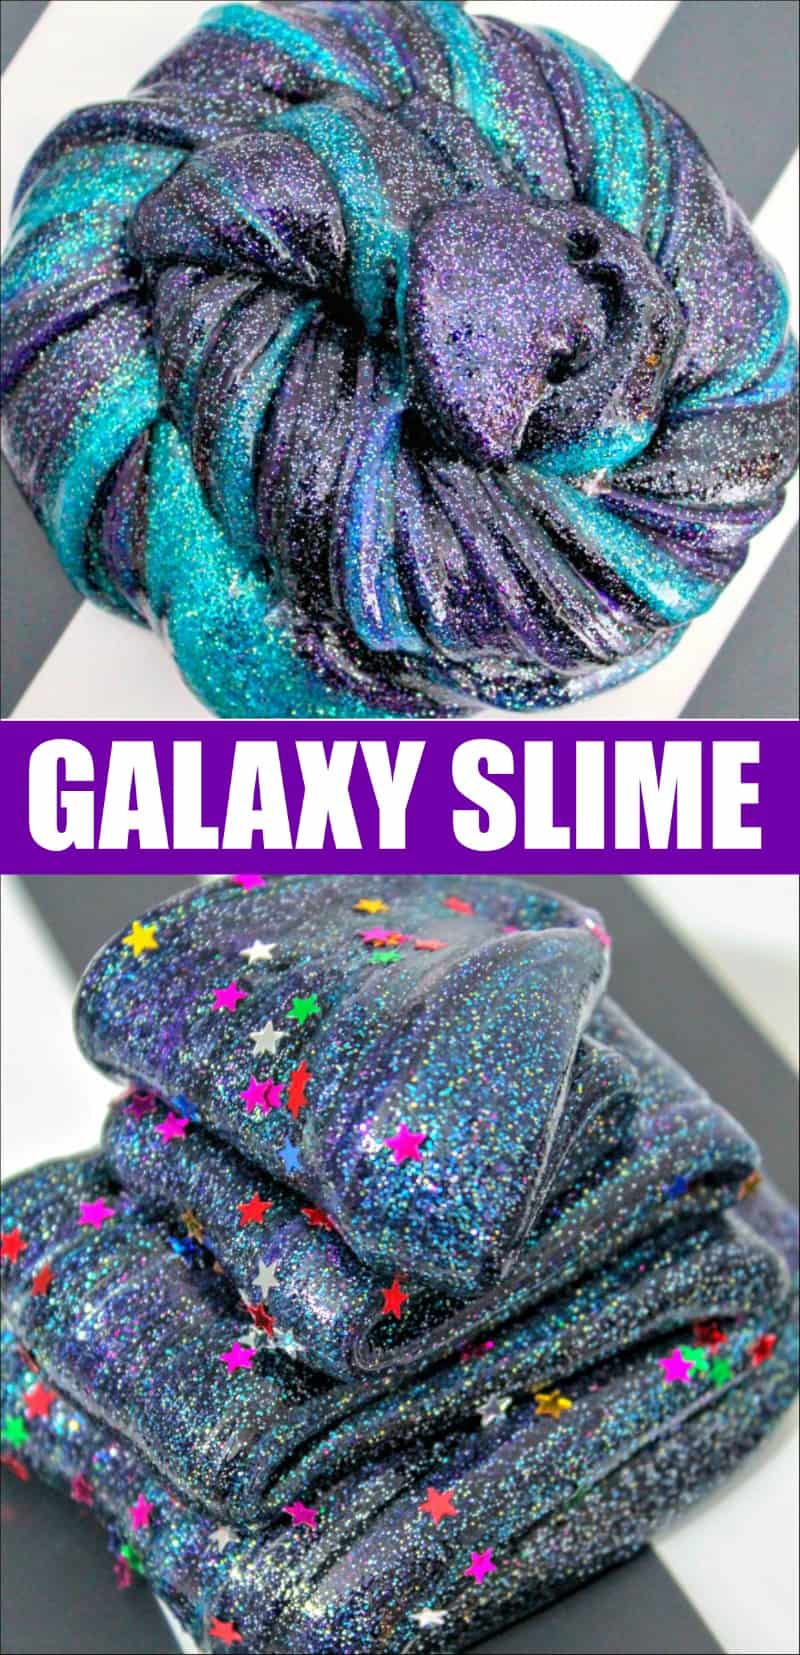 This Galaxy Slime Recipe may be my favorite slime recipe yet. It is just so pretty and colorful, and did I mention sparkly? If your kids are obsessed with slime, then this is one slime recipe you must try. #slime #slimerecipe #galaxyslime